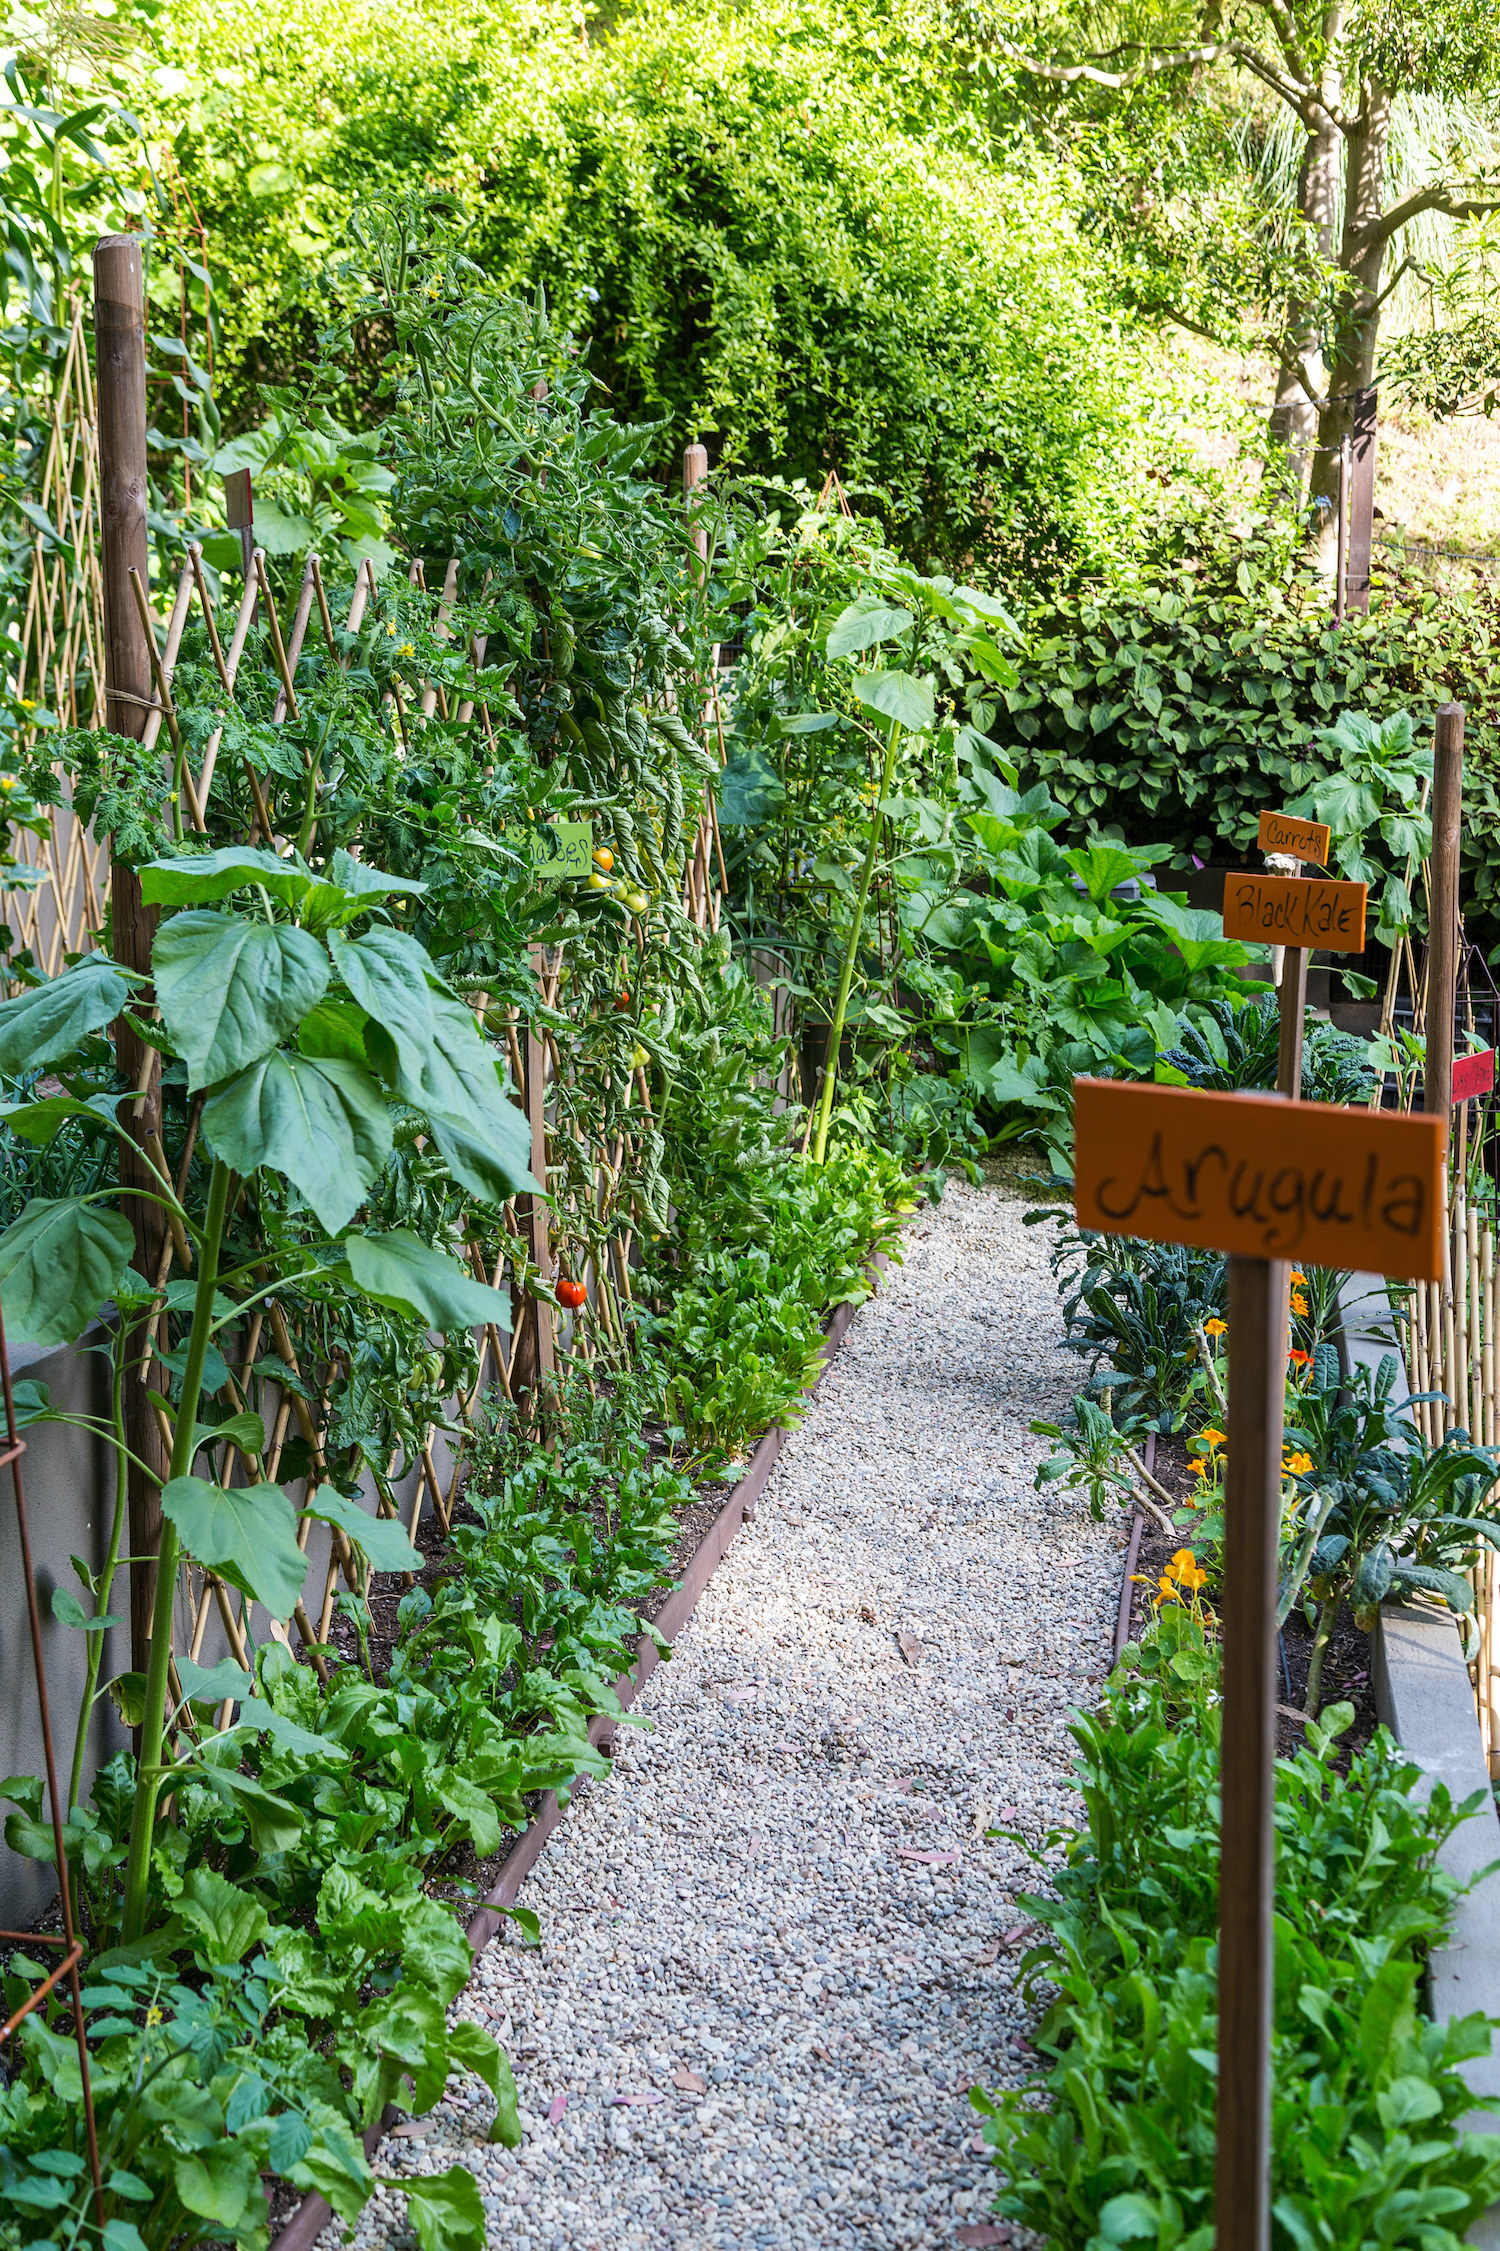 A close-up of the garden which has wooden post signs for arugula and black kale